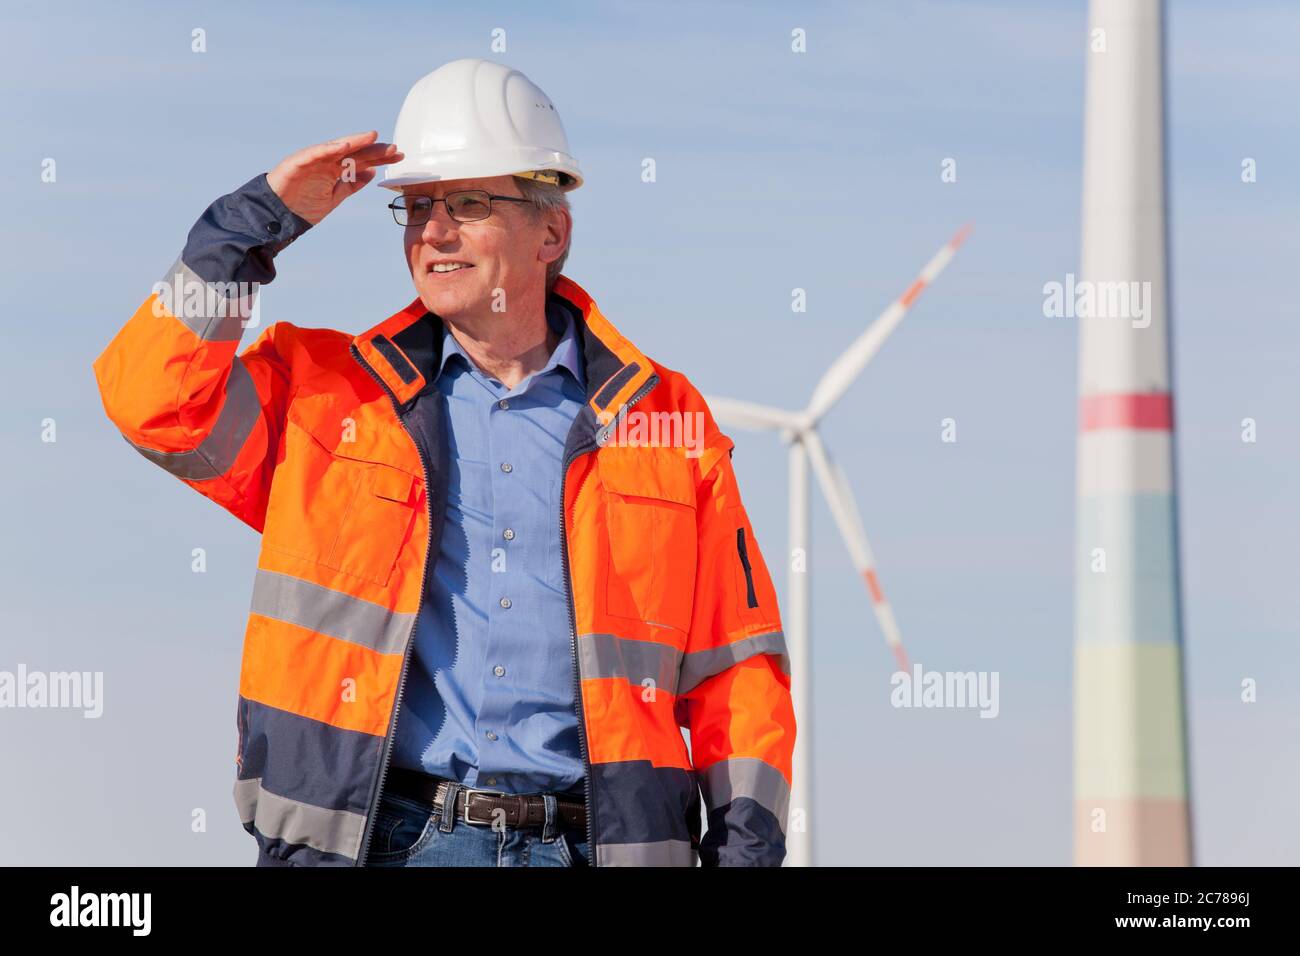 Engineer with hard hat and protective clothing in front of a windfarm looking for a bright future for green energy - focus on the person Stock Photo